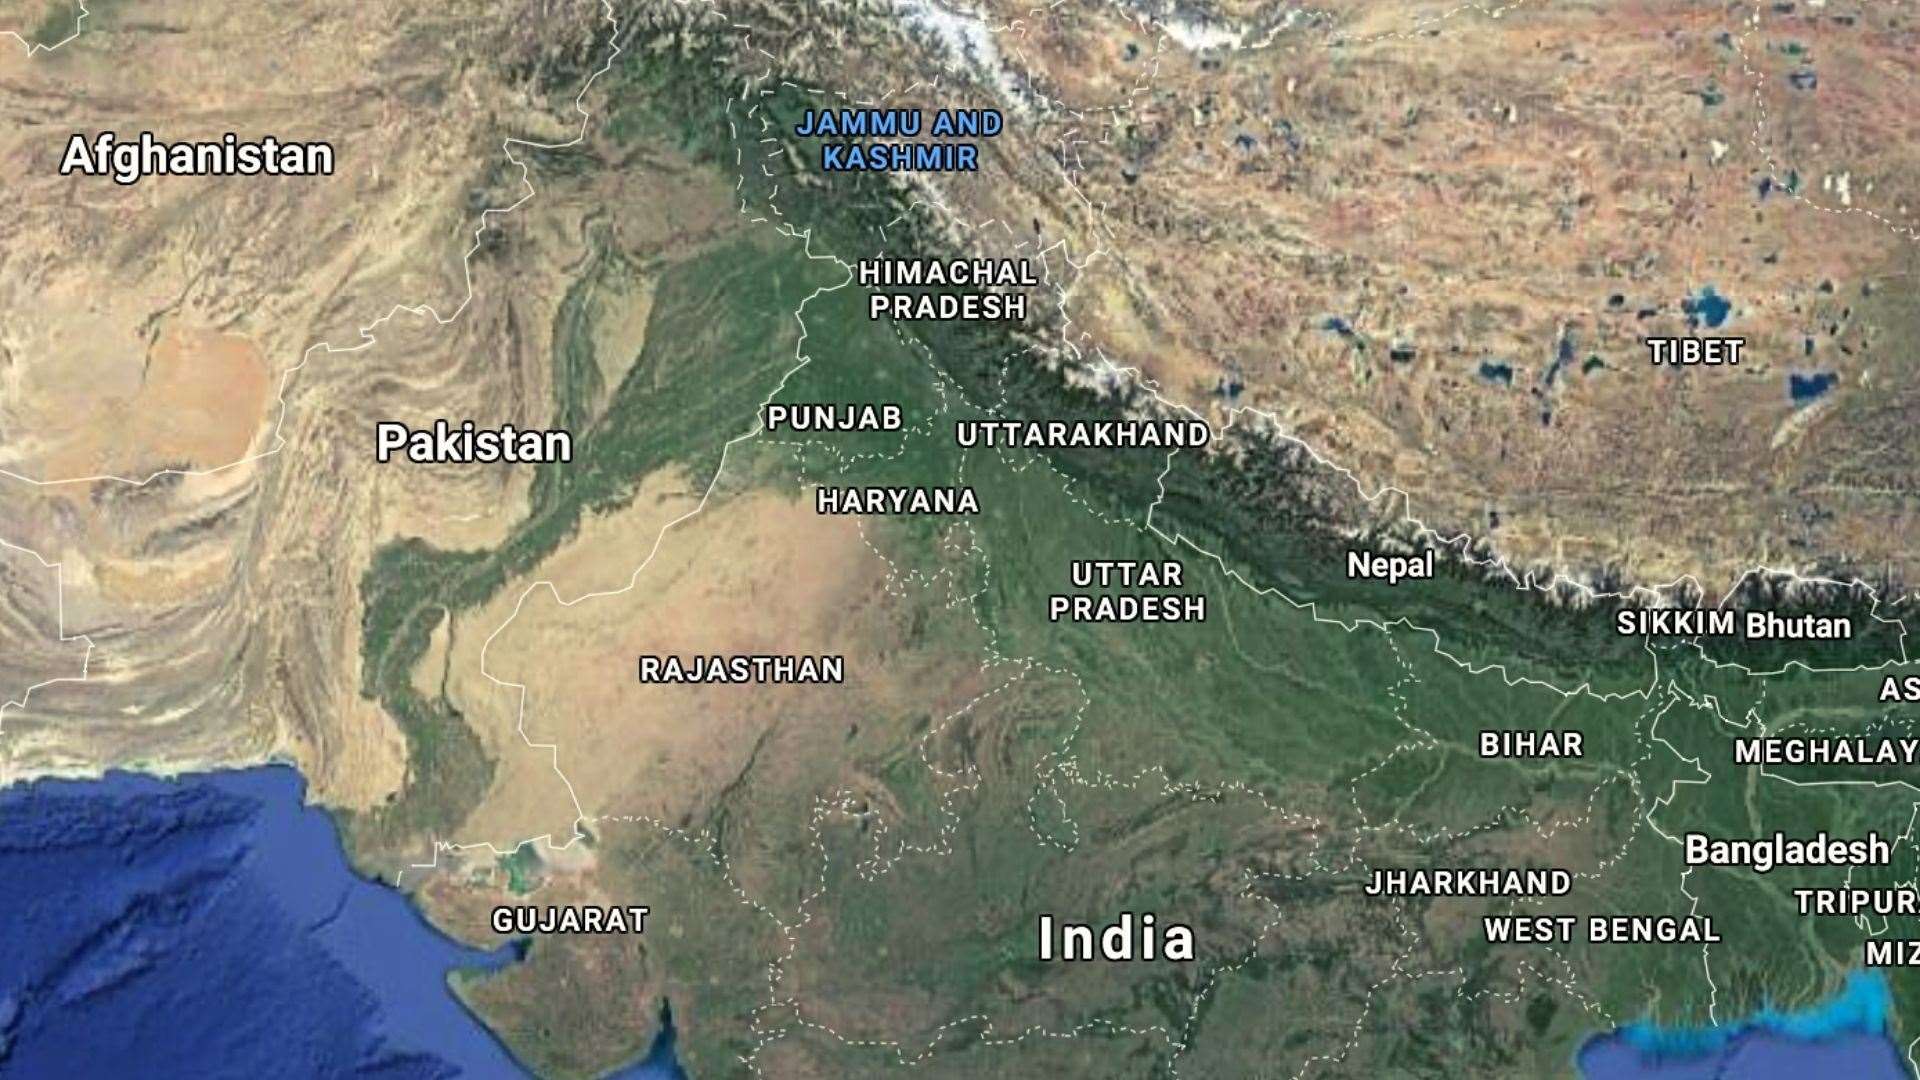 Jammu and Kashmir is nestled between Pakistan and India. Pic: Google Maps